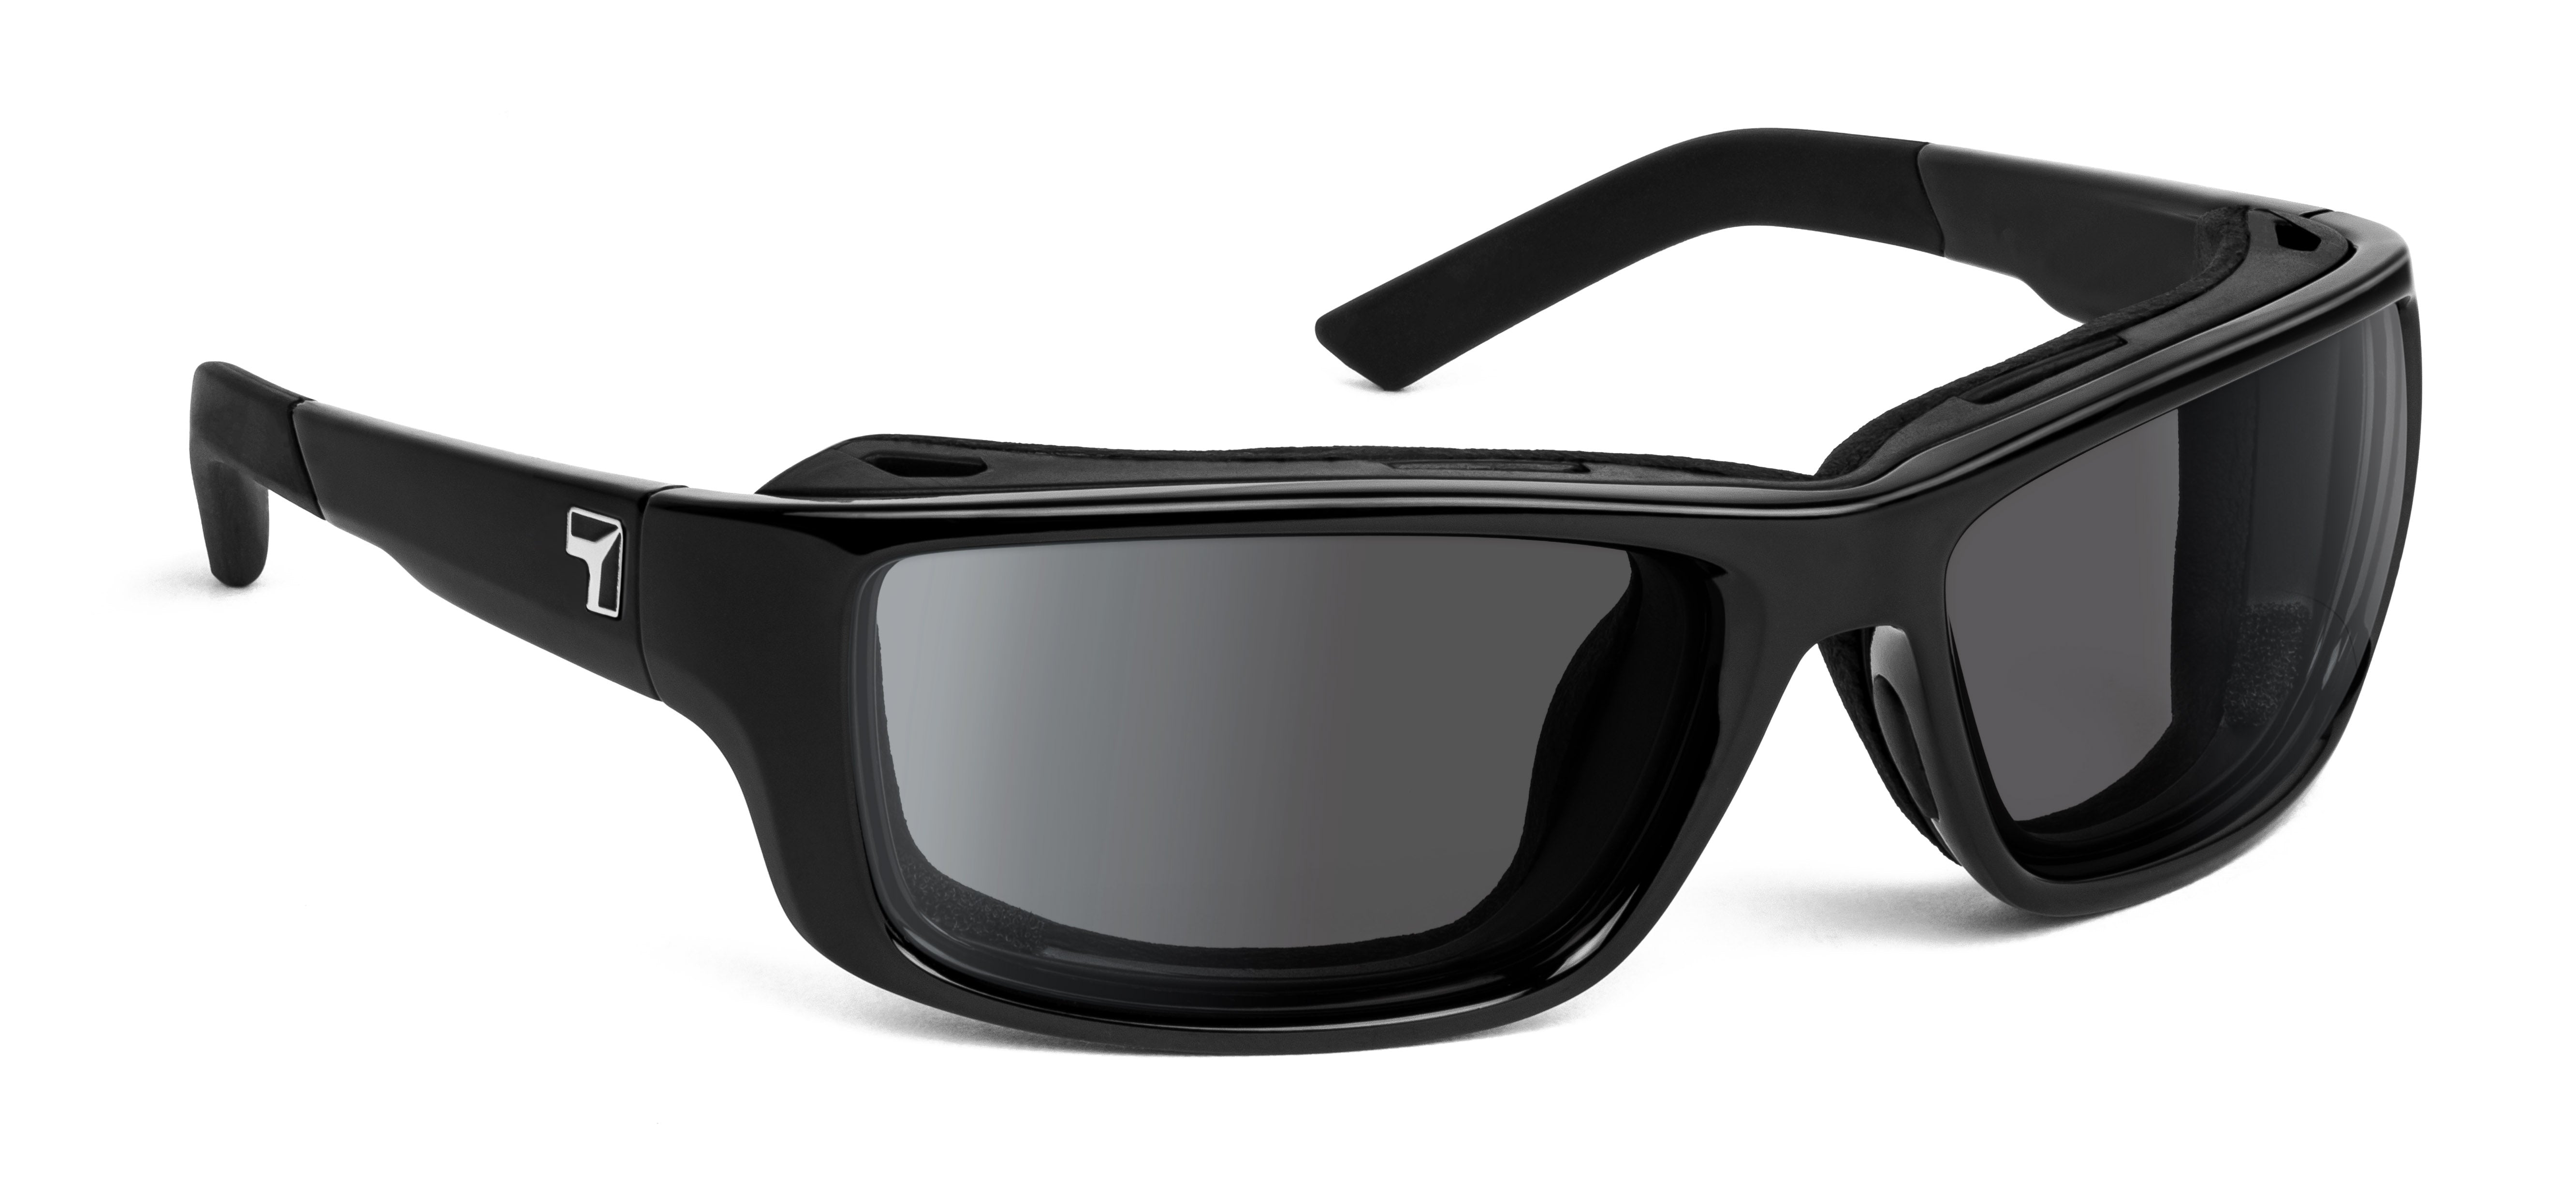 7eye by Panoptx Notus Glossy Black Frame with multiple lens options